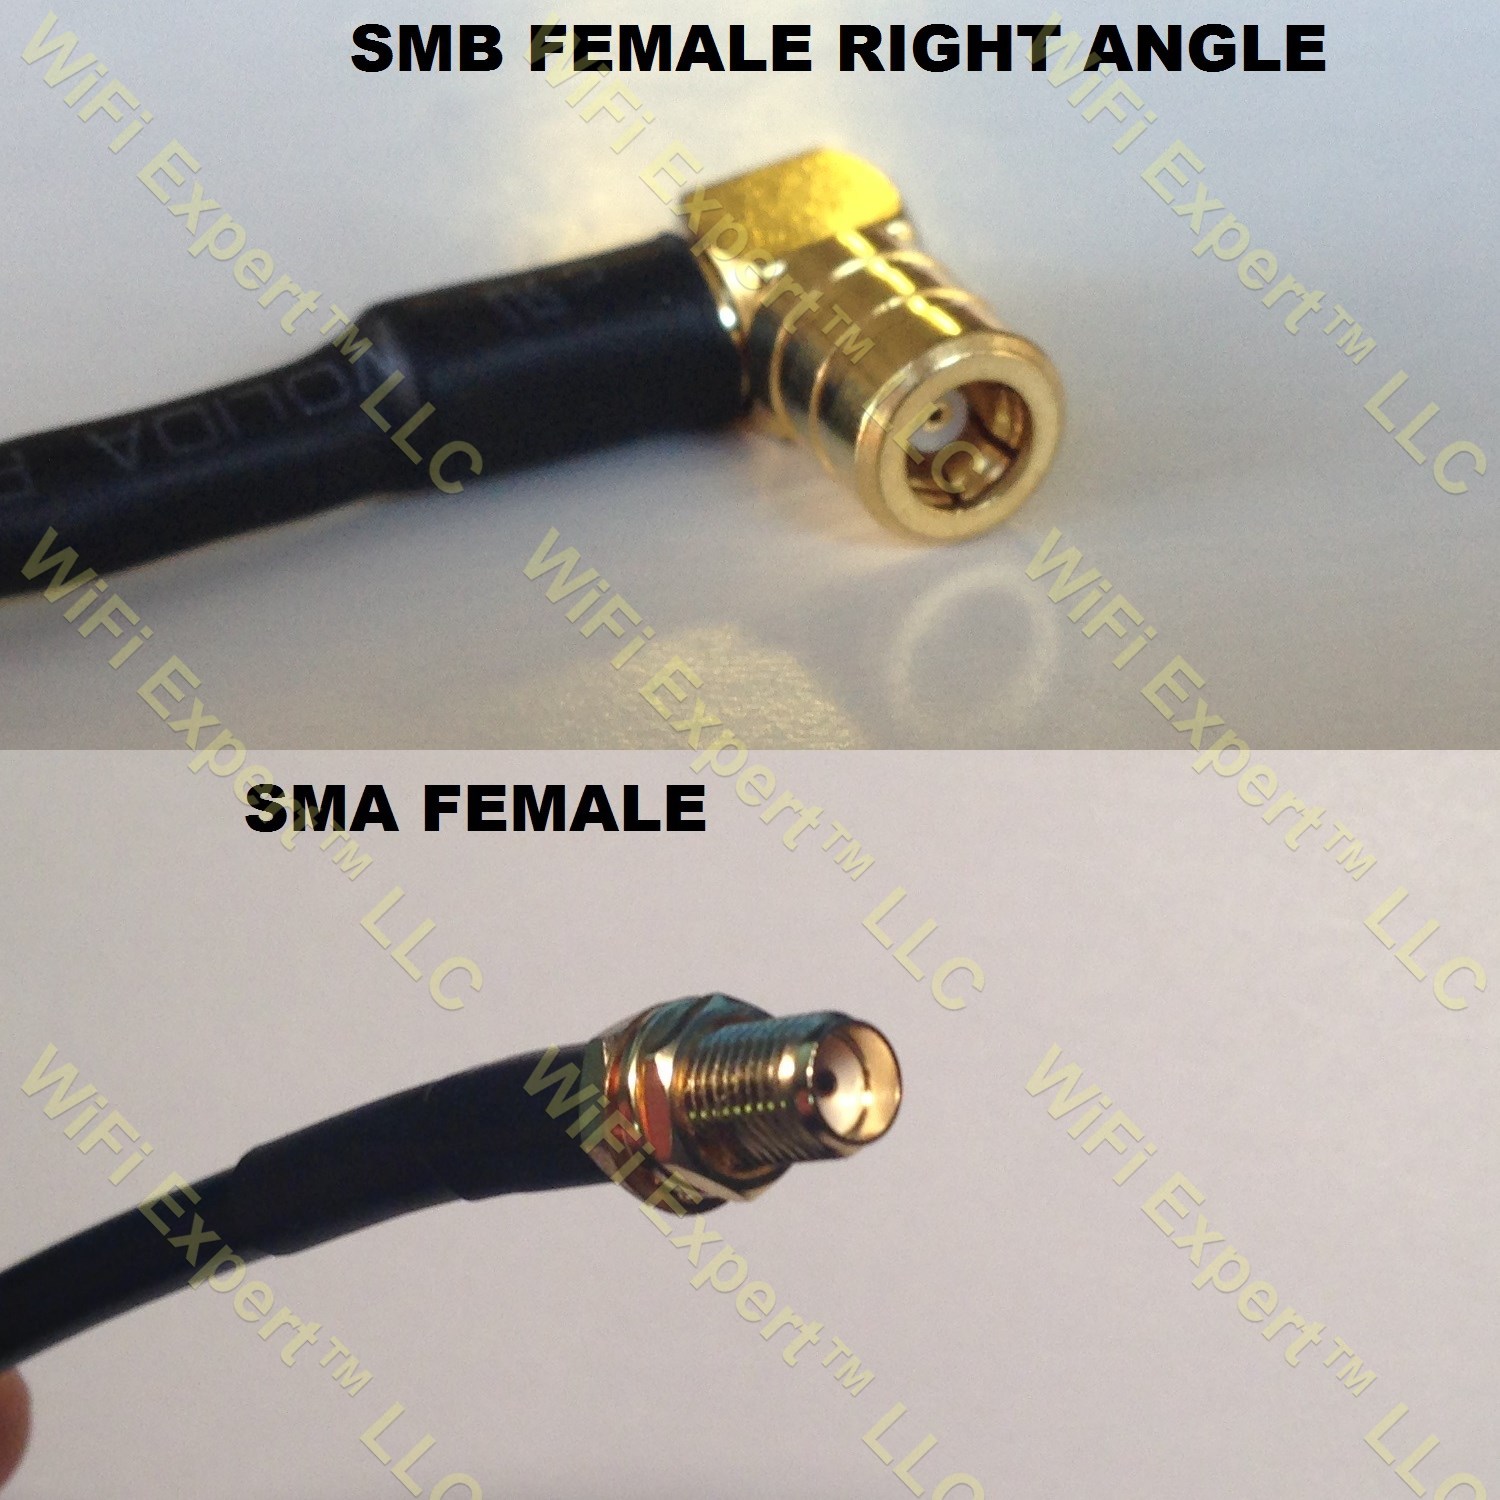 Two Aeroflex RG-316 Coax Adapter Cable SMB Female R/A to SMA Male Straight 2 